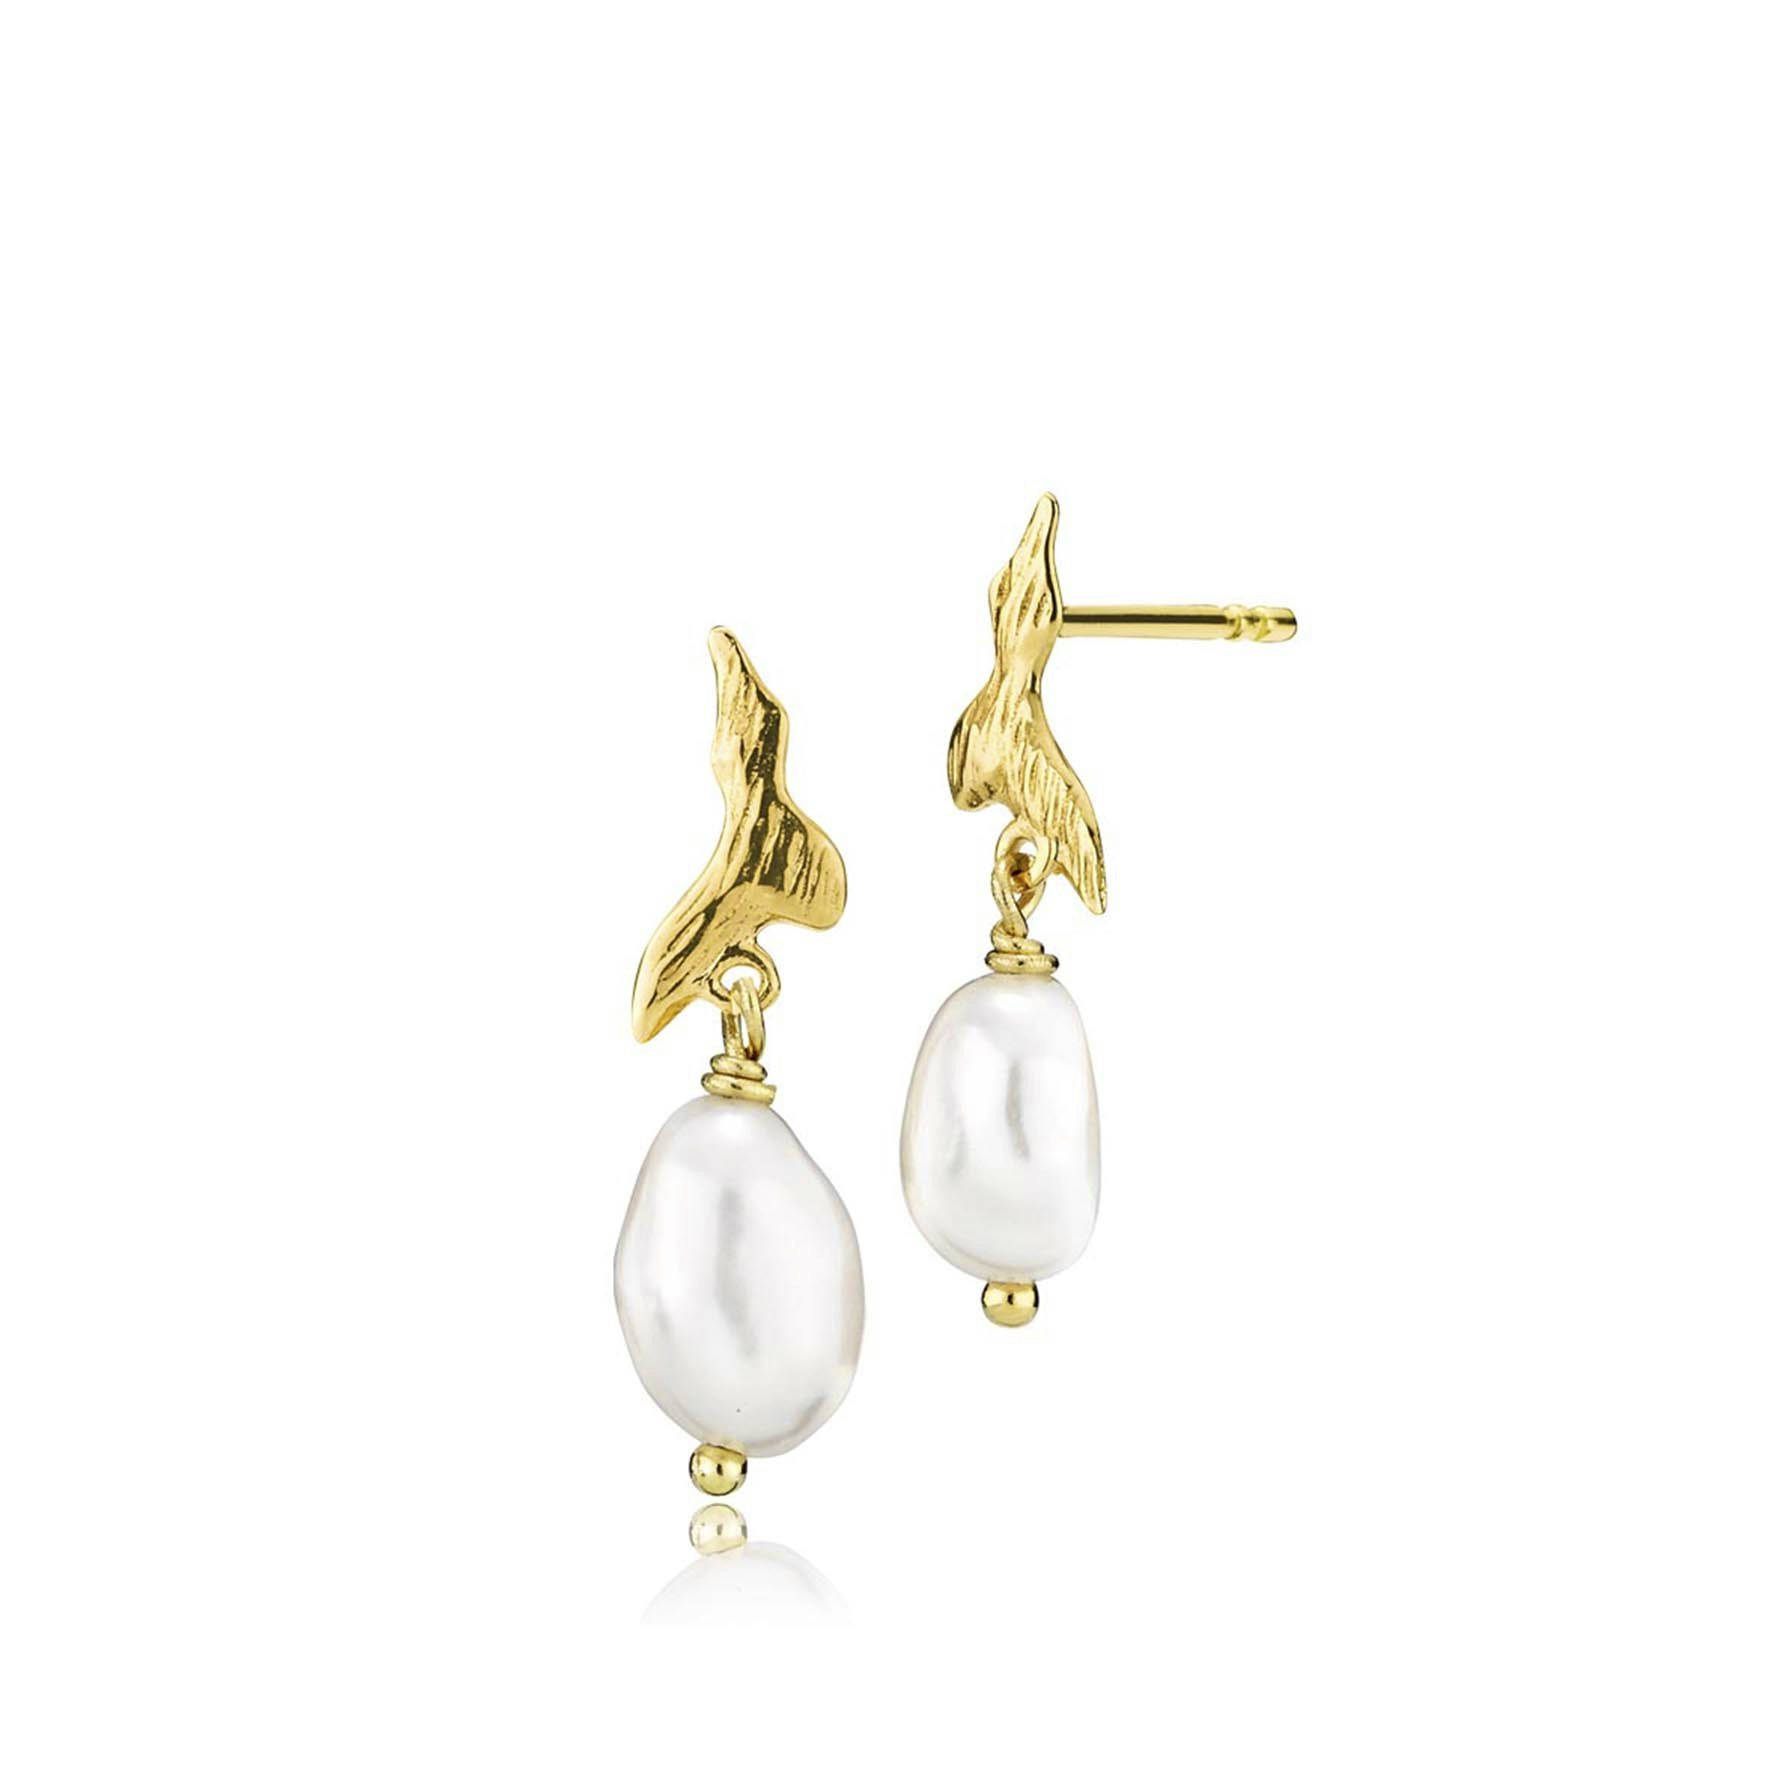 Fairy Earrings With Pearl from Izabel Camille in Goldplated-Silver Sterling 925